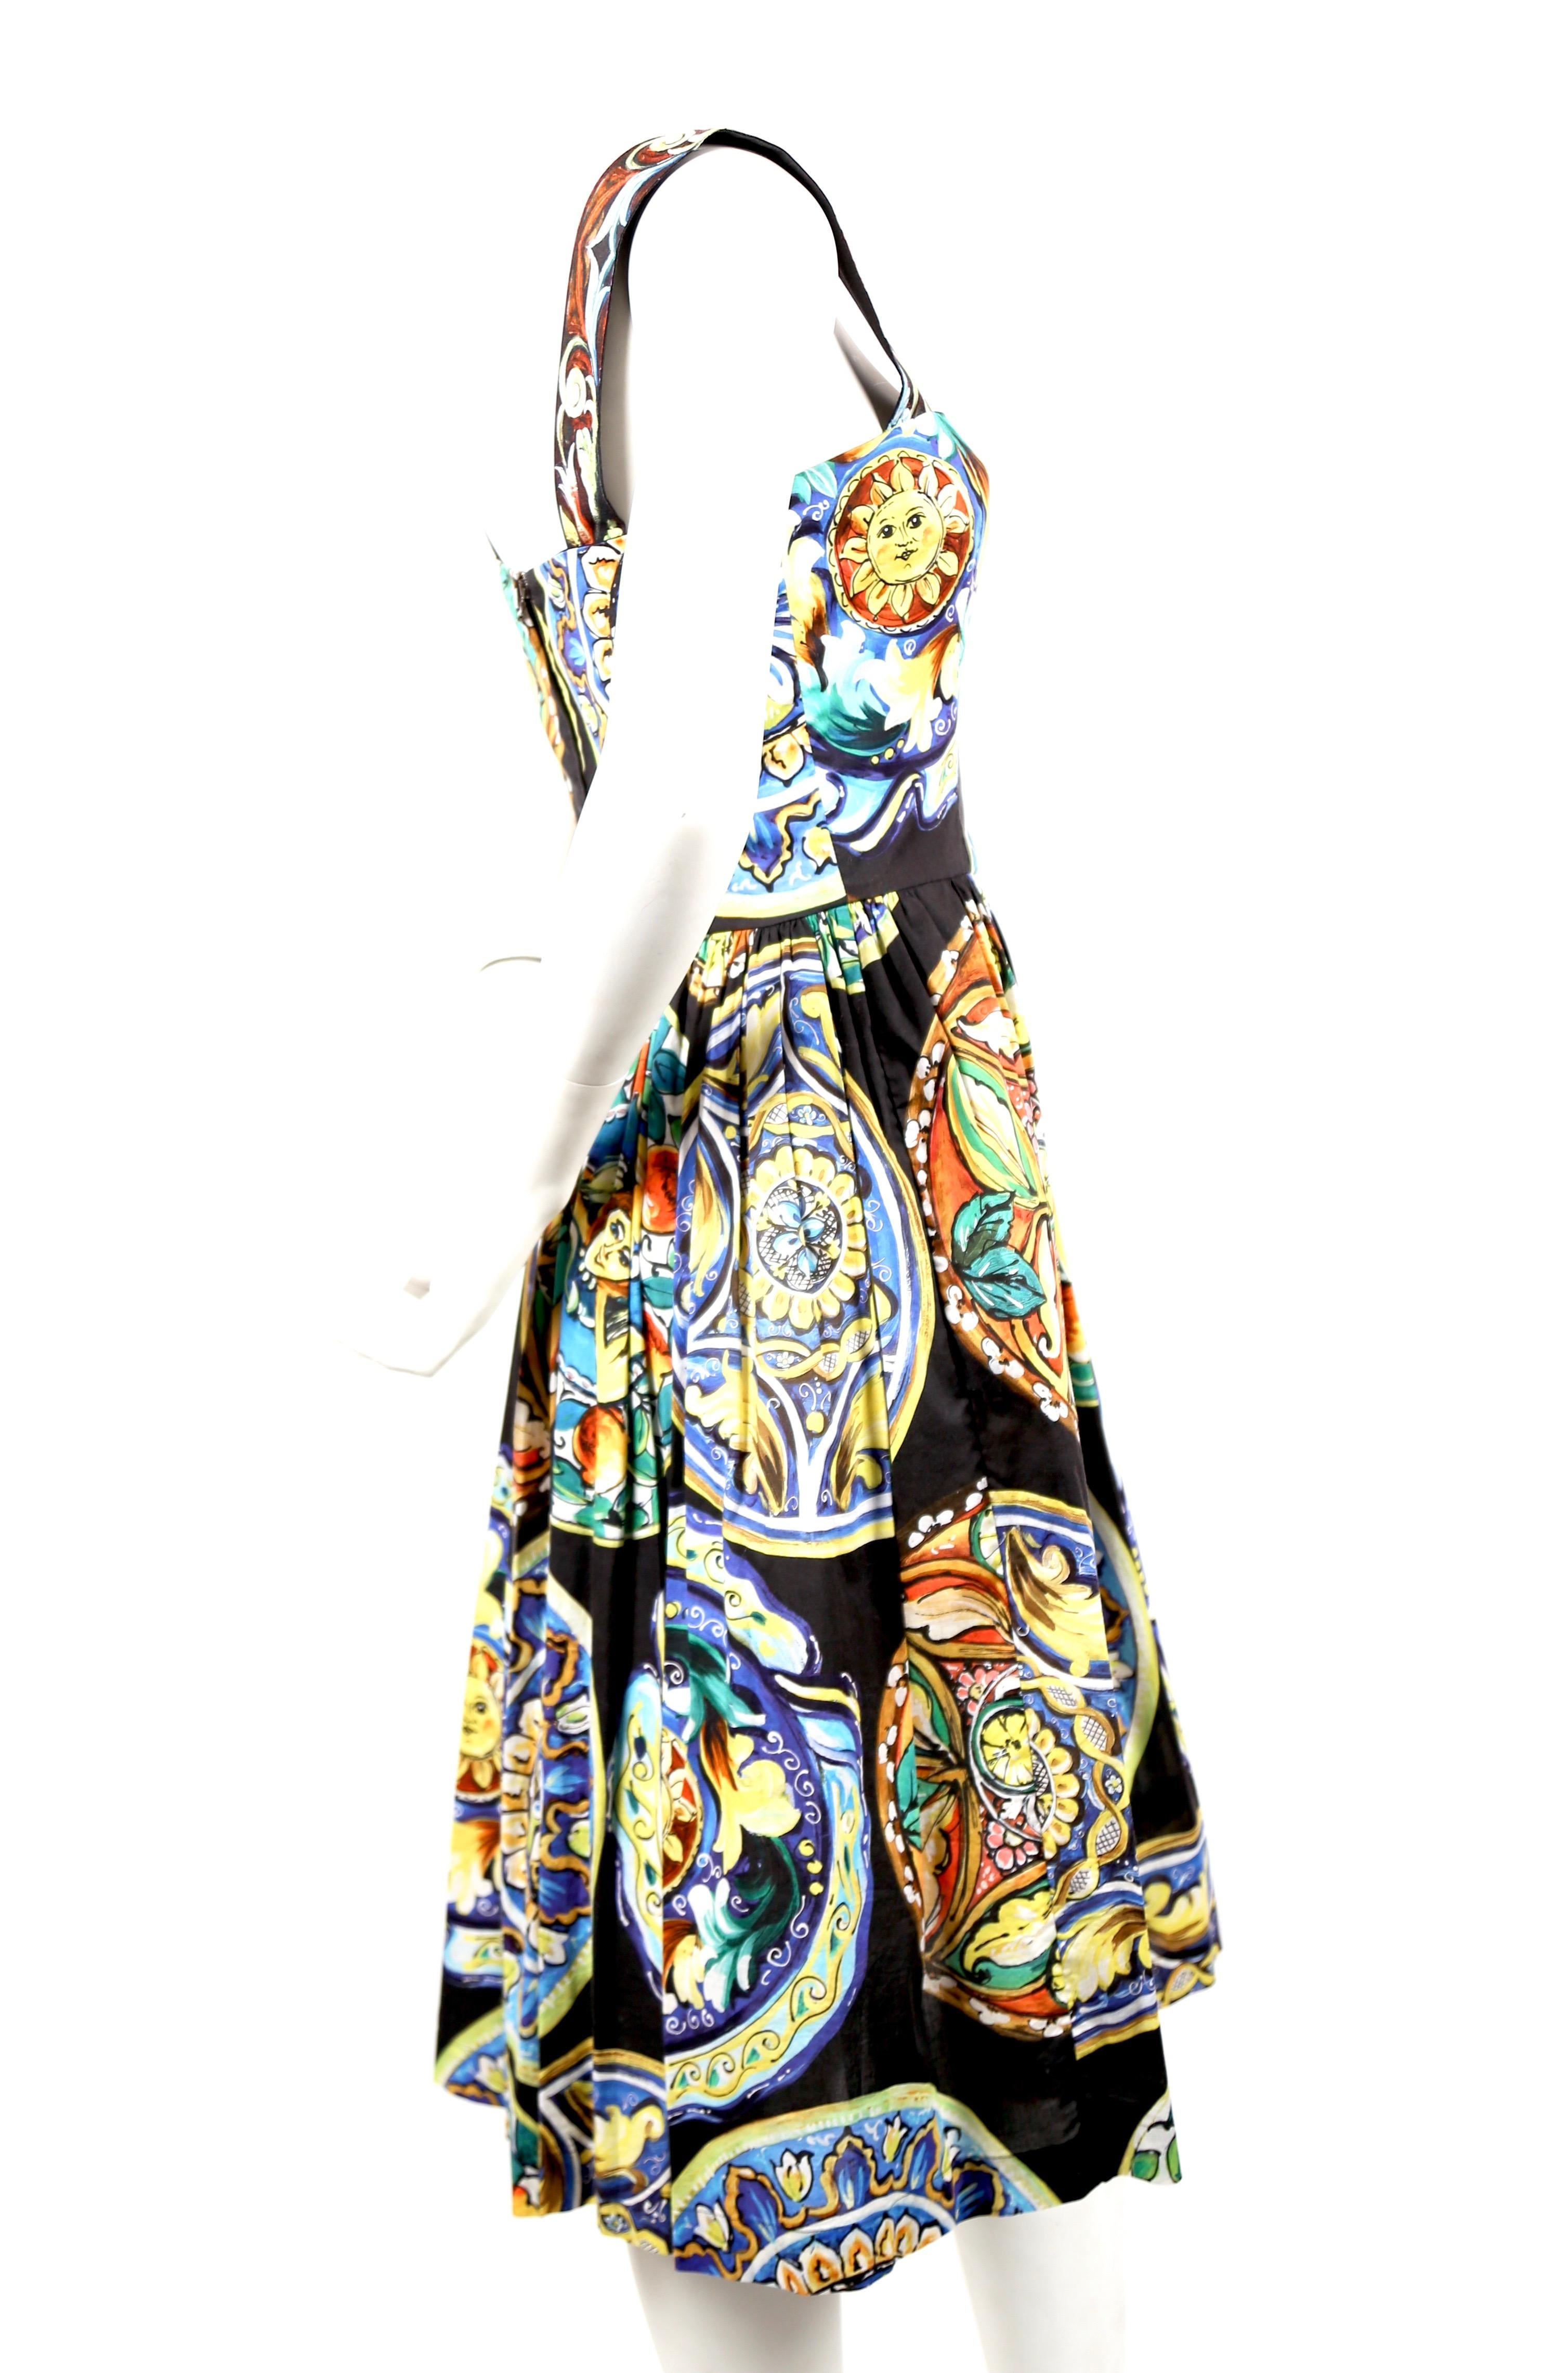 Sicilian printed cotton day dress designed by Dolce & Gabbana. Labeled an Italian size 40 which best fits a US 2-4. Approximate measurements: 32